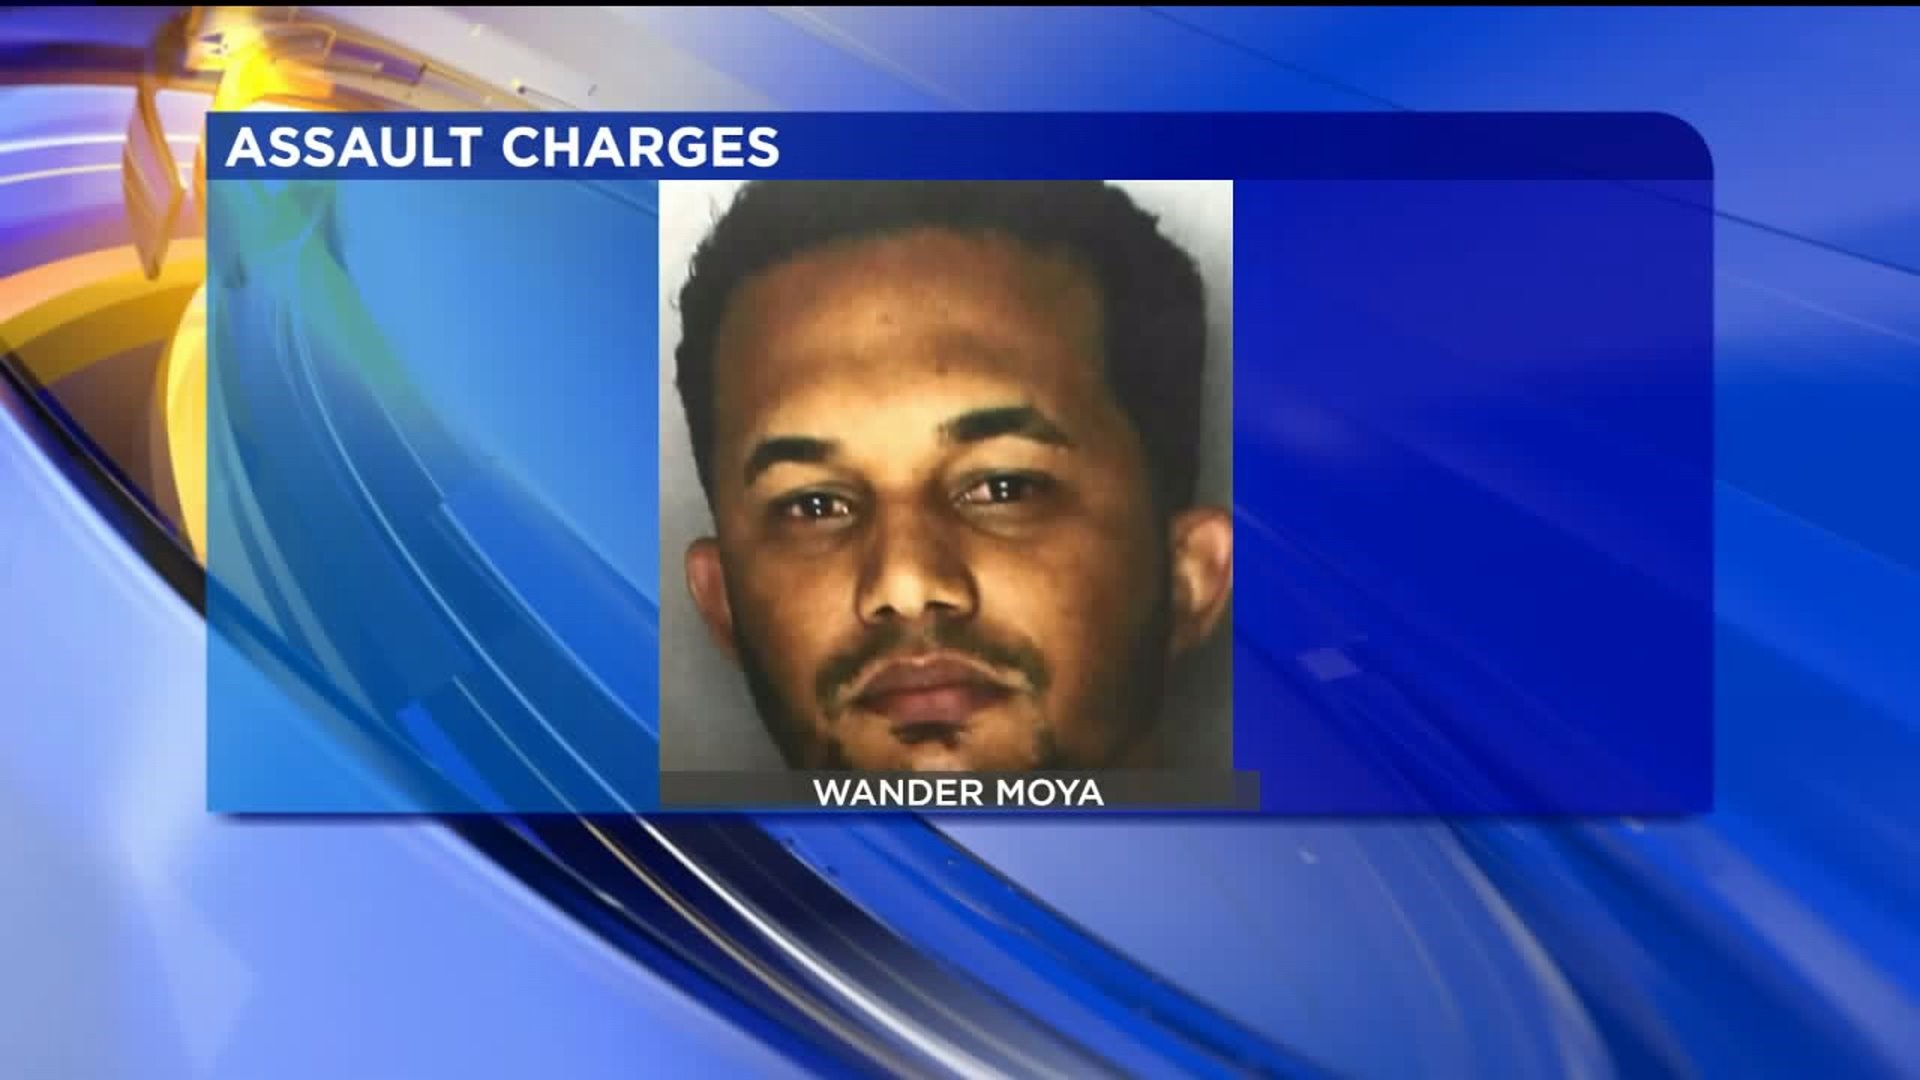 Police: Man Tried to Stab Another with a Screwdriver over Money